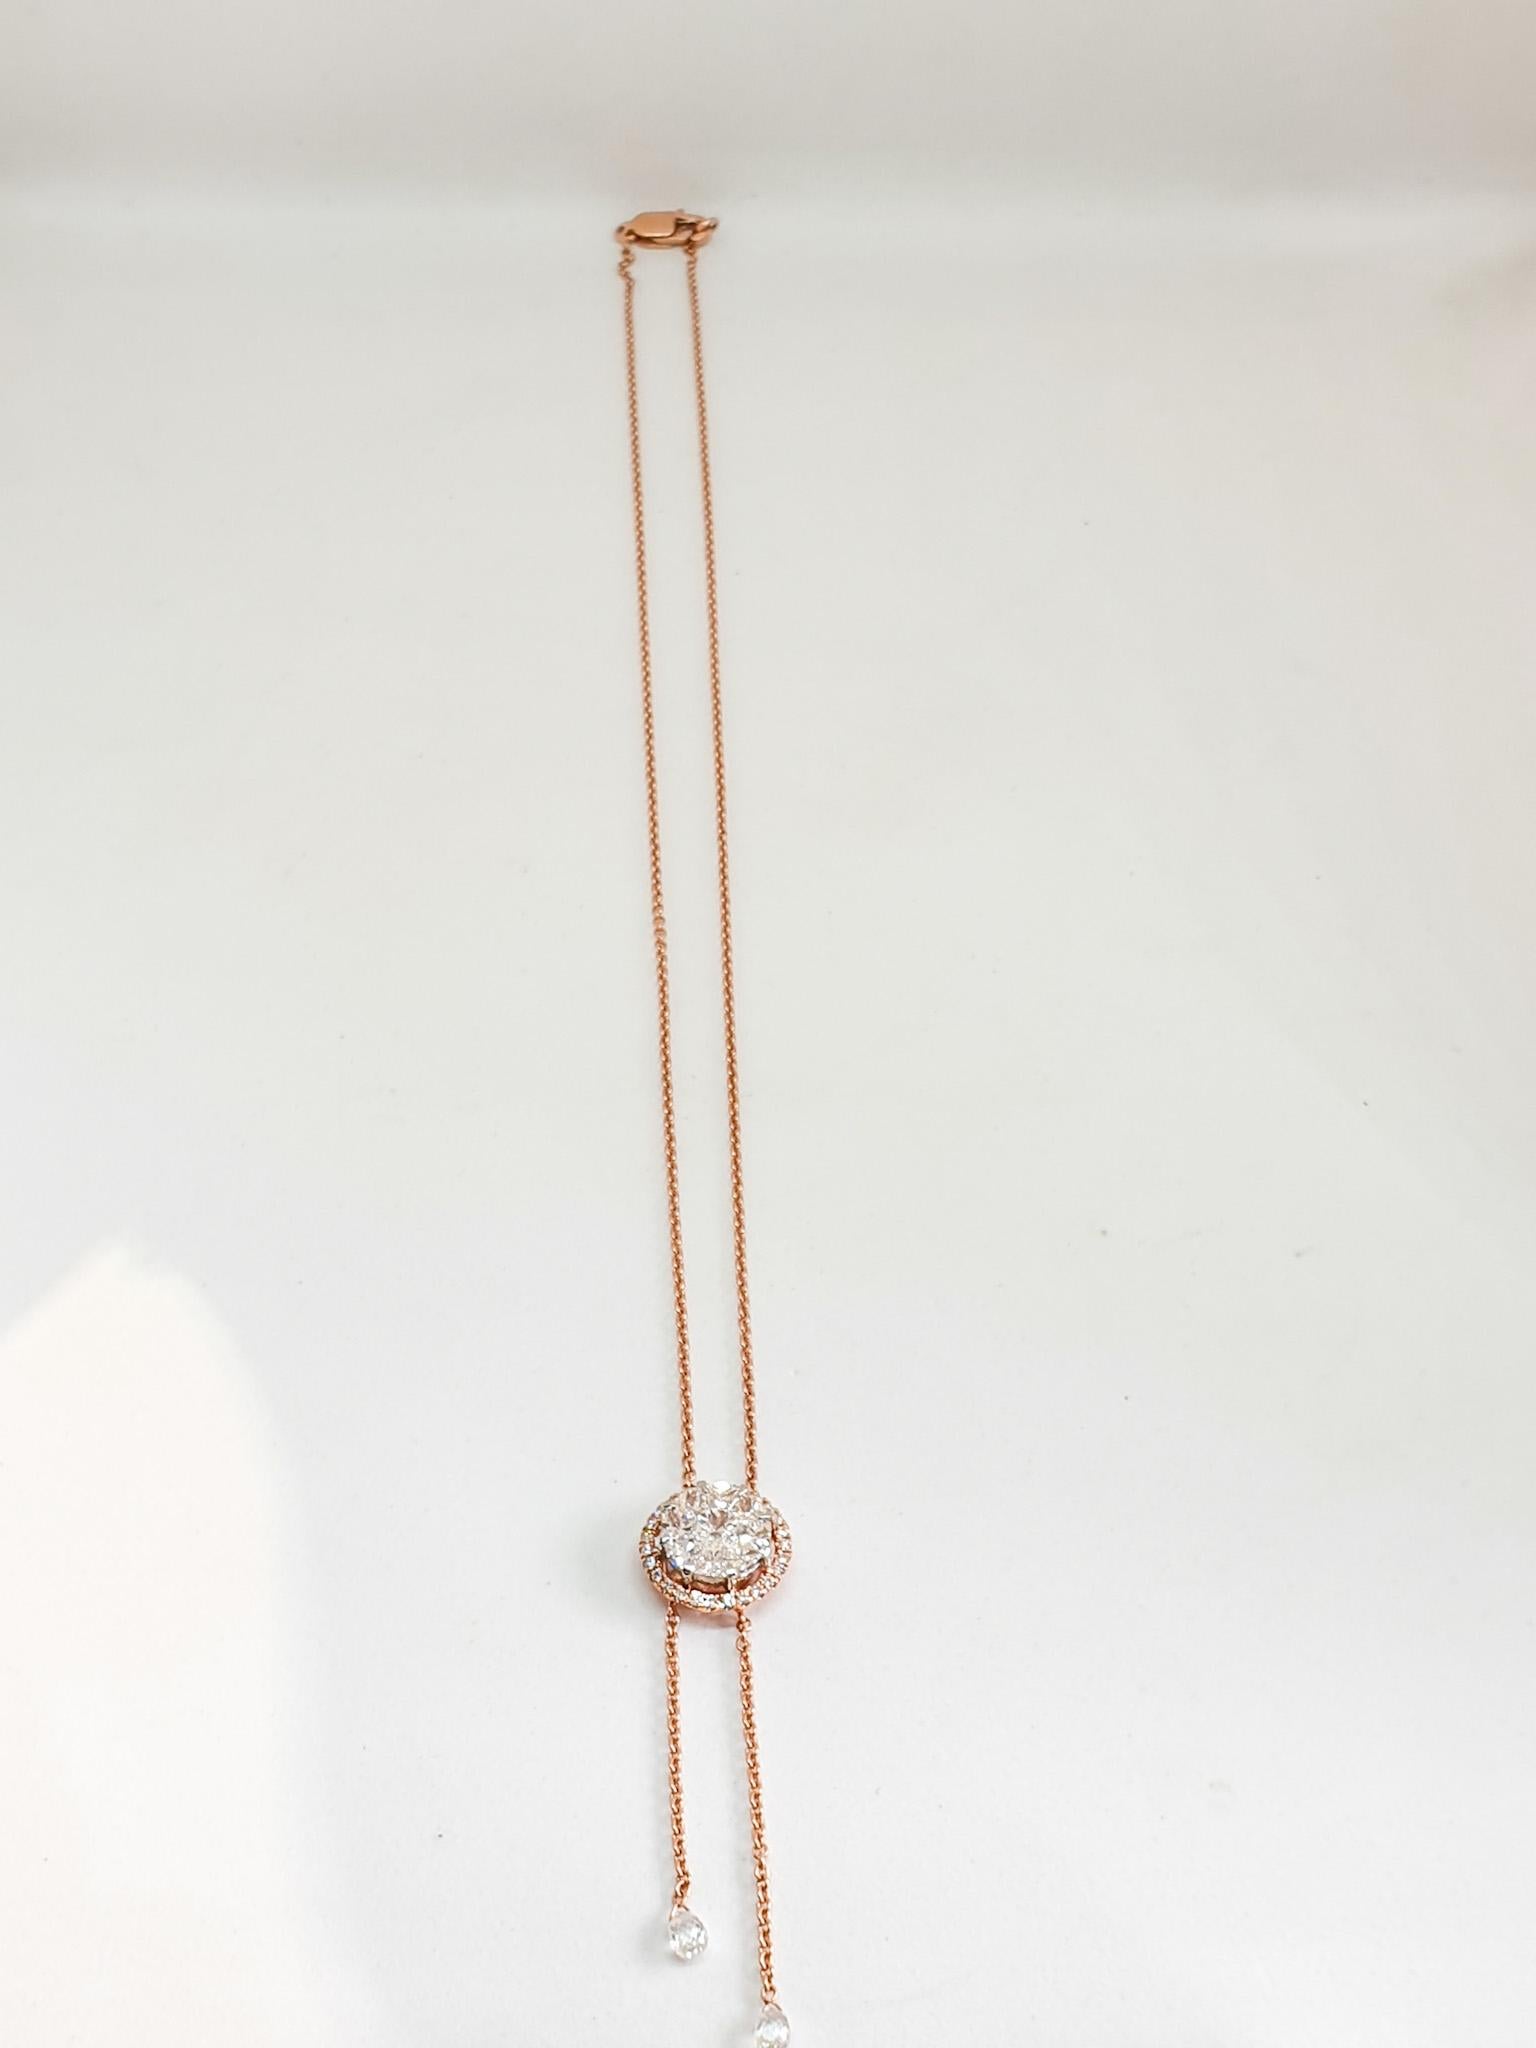 A composite set round center meticulously crafted in 18 karat rose gold along with the periphery of small brilliant cut round diamonds & hand made chain complete this modern pendant necklace.
This pendant necklace would make a very casual chic day